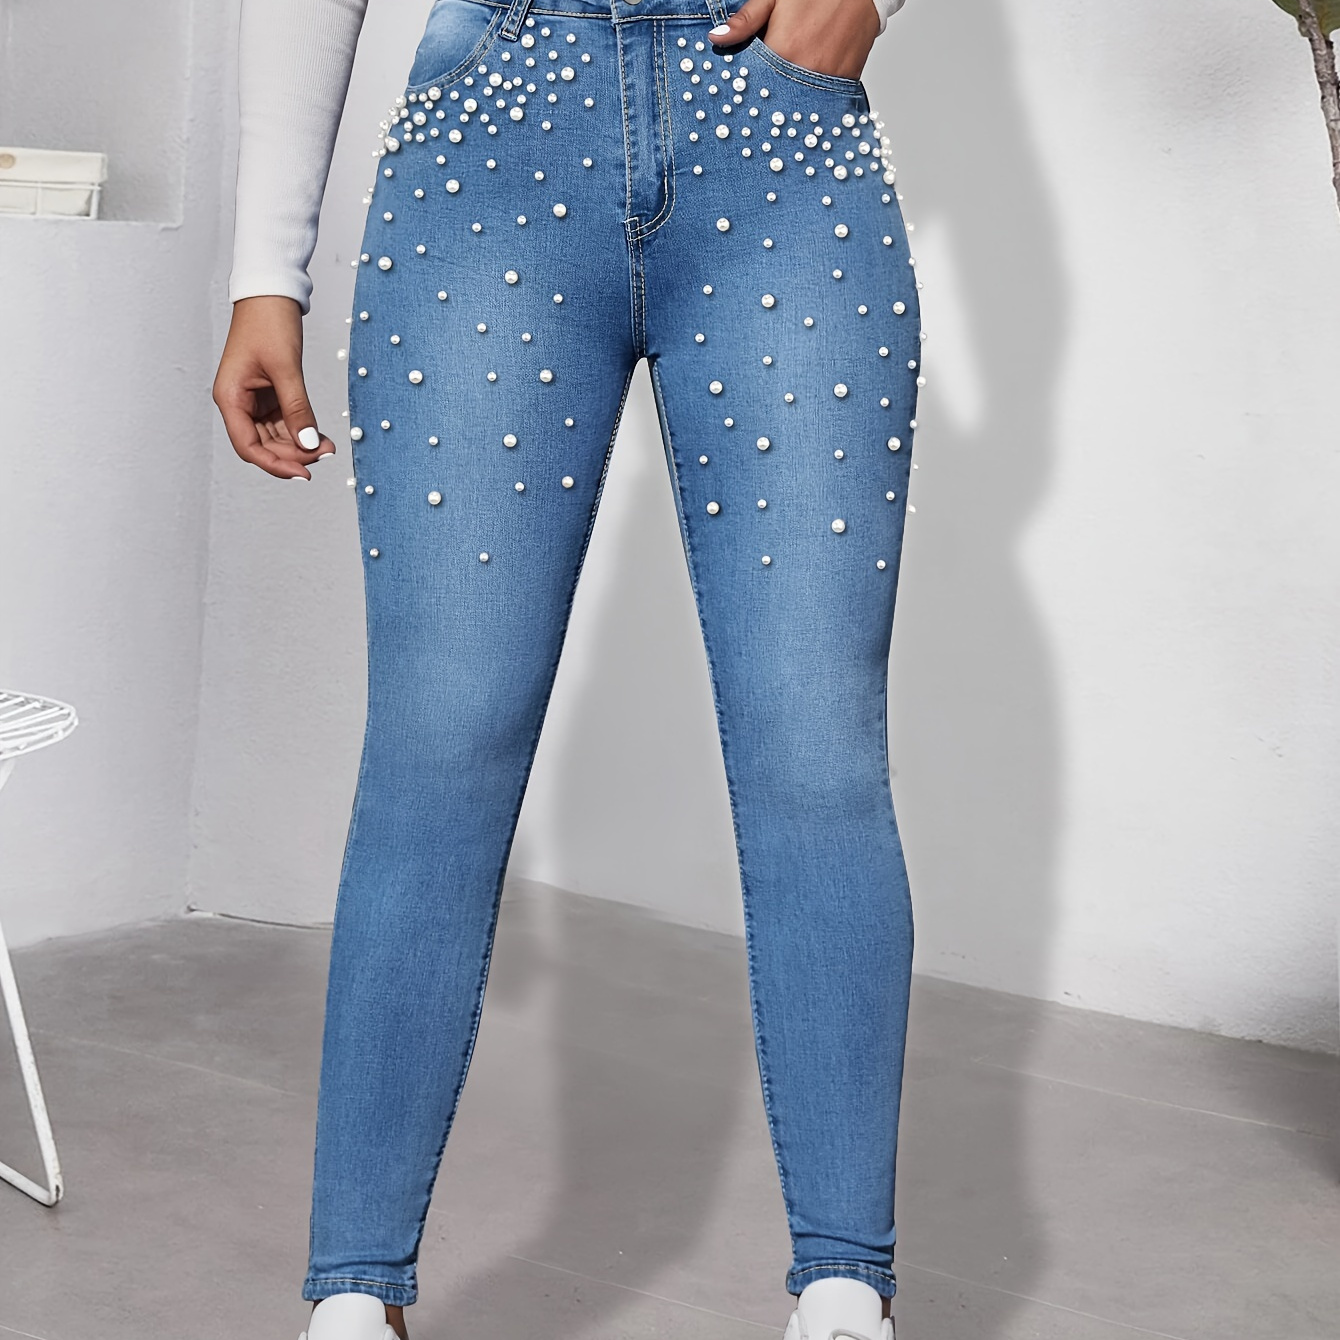 

Faux Pearl Decor Casual Skinny Jeans, Slant Pockets Slim Fit Stretchy Tight Jeans, Women's Denim Jeans & Clothing